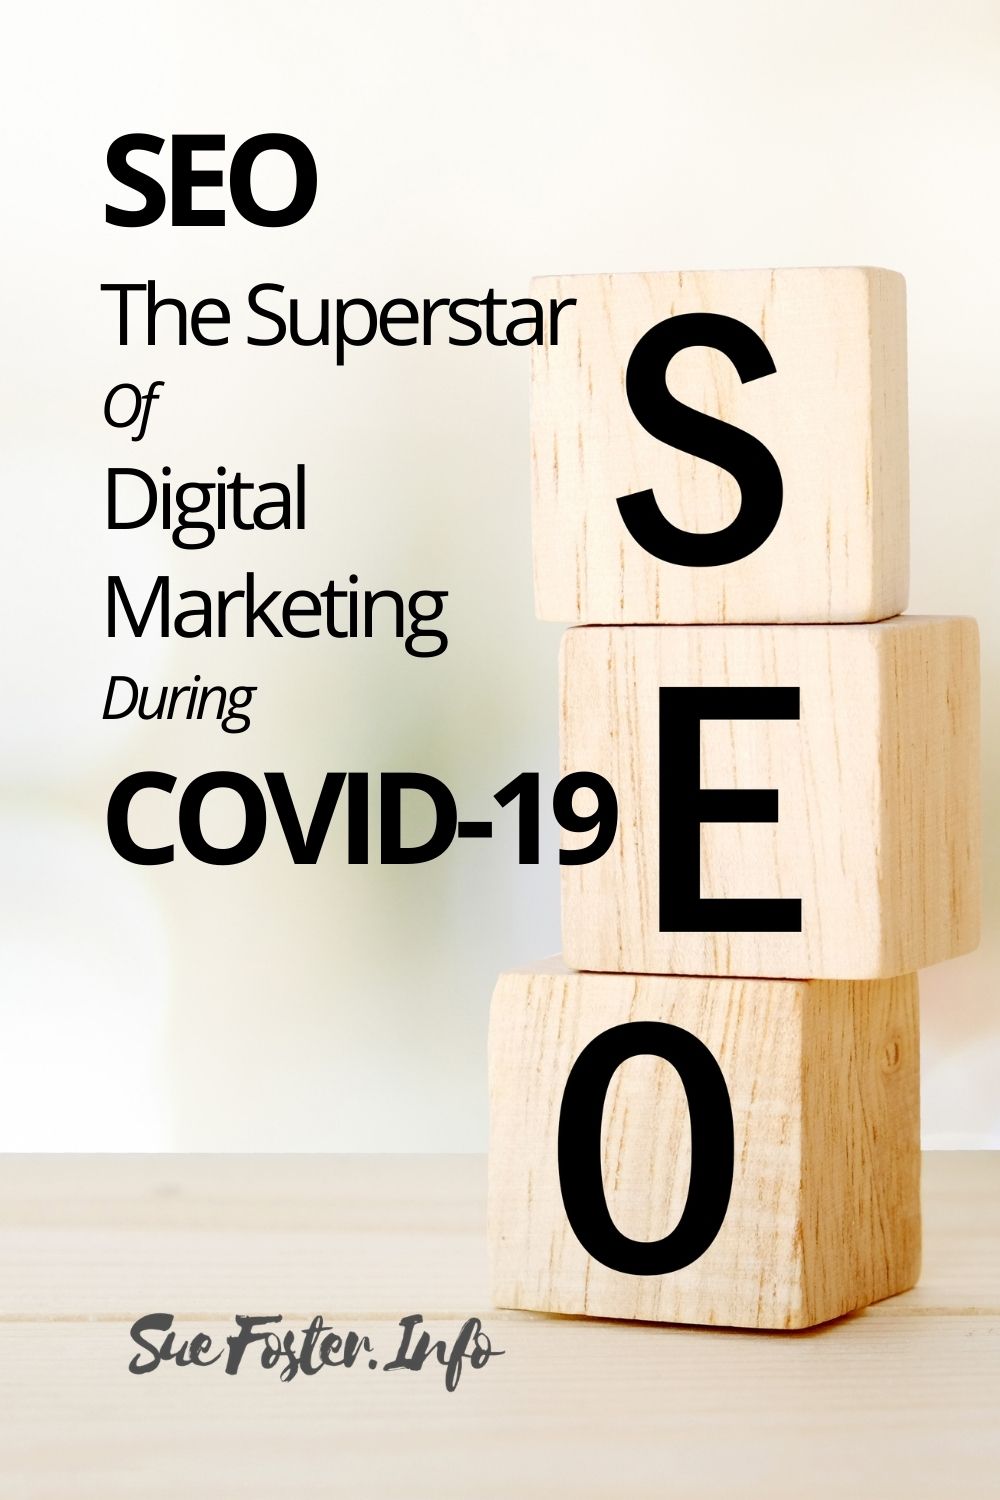 SEO – The superstar of digital marketing during COVID-19